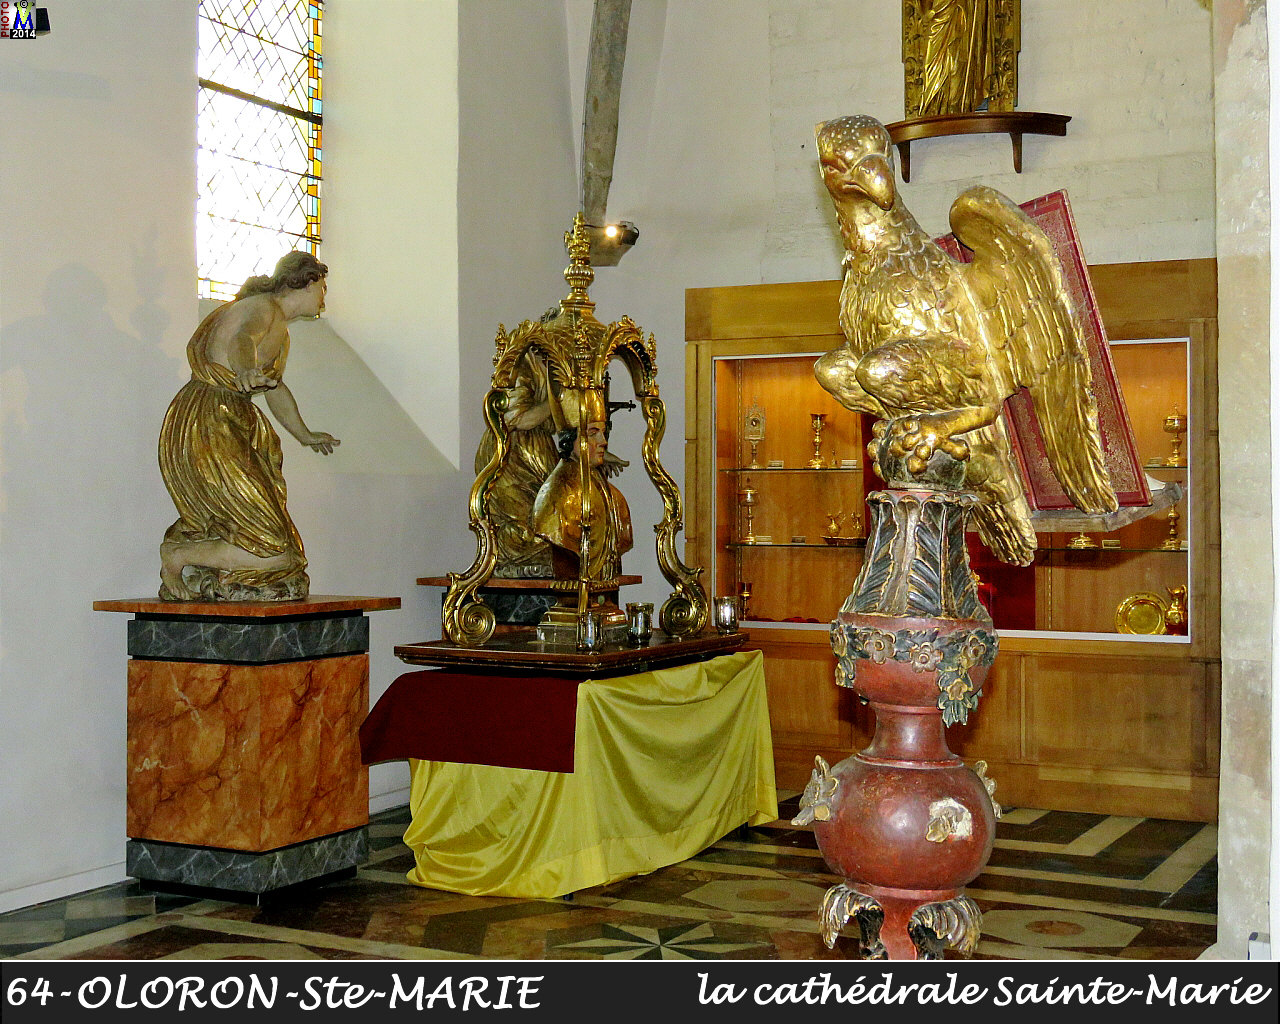 64OLORON-STE-MARIE_cathedrale_234.jpg